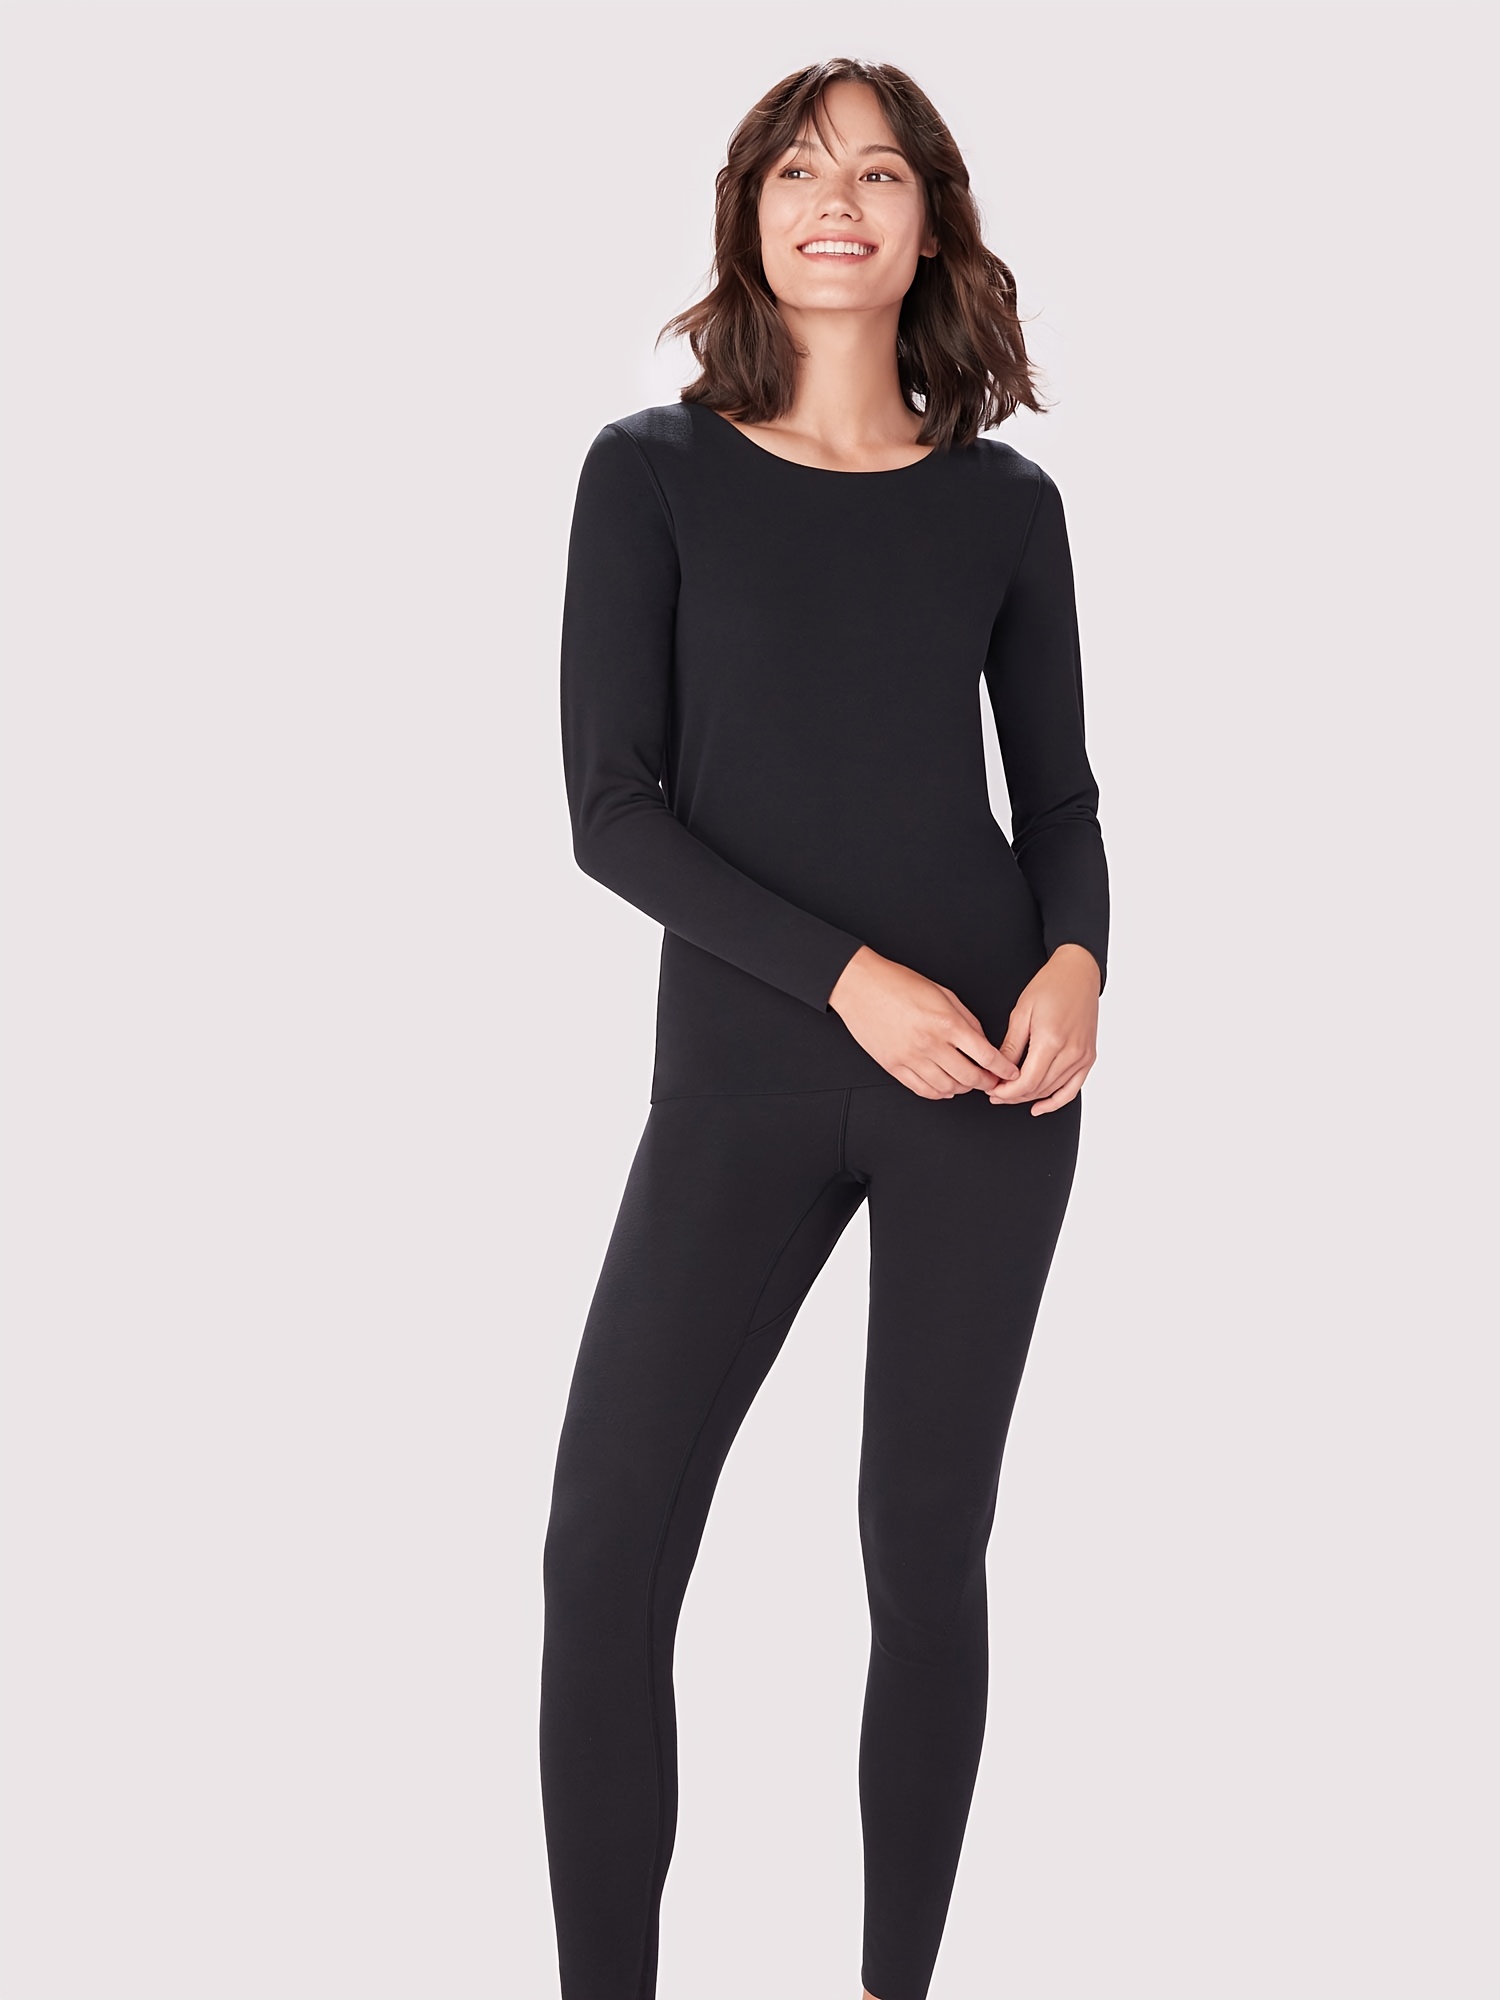 Thermal Underwear For Women Long Johns Fuzzy Lined Base Layer Top And  Bottom Sets